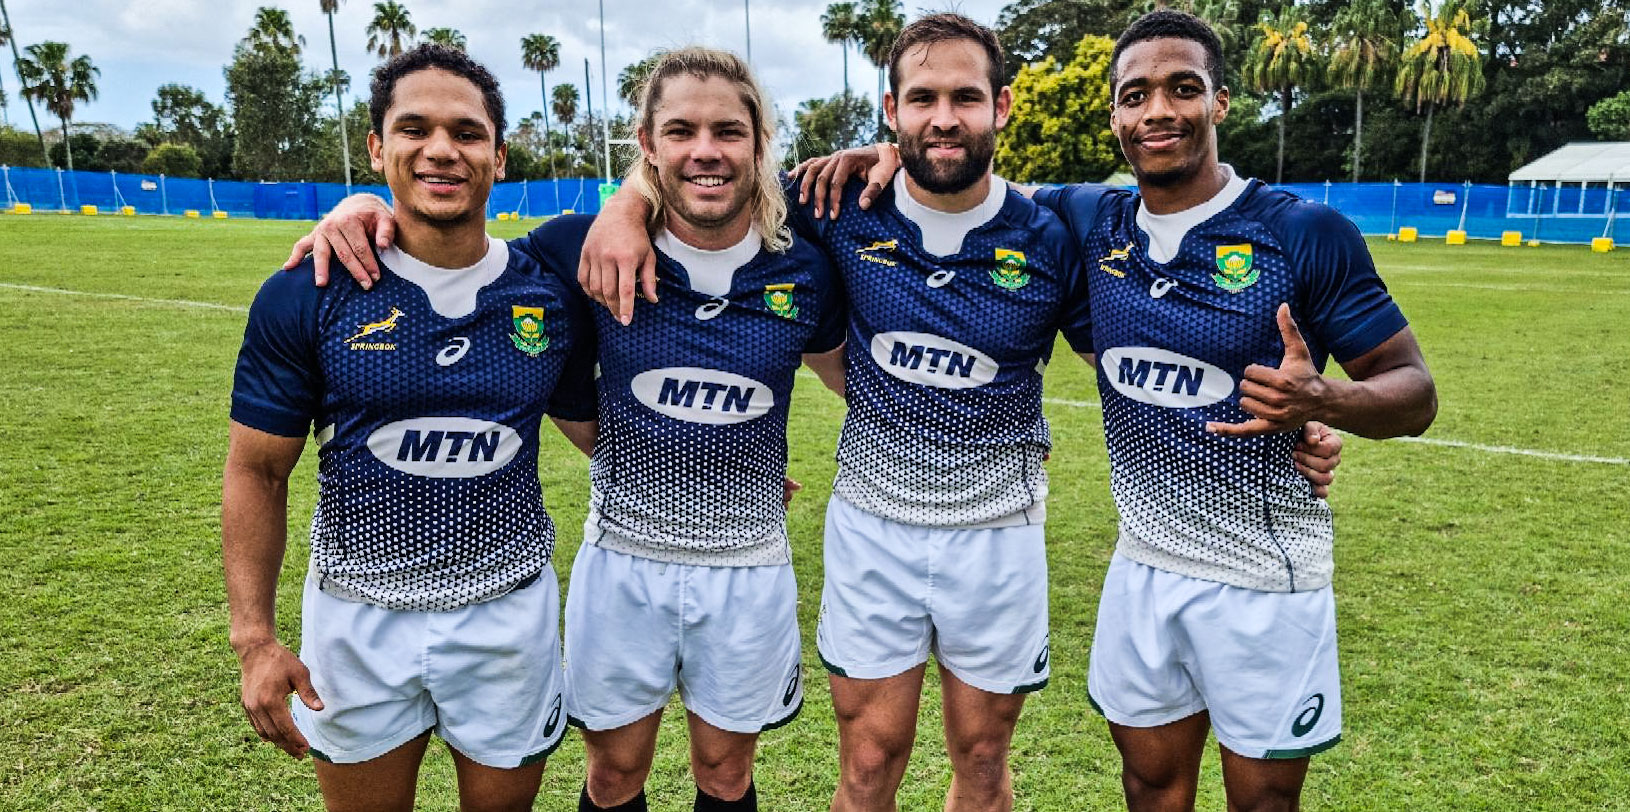 The four scrumhalves on tour with the Springboks, Herschel Jantjies, Faf de Klerk, Cobus Reinach and Grant Williams.